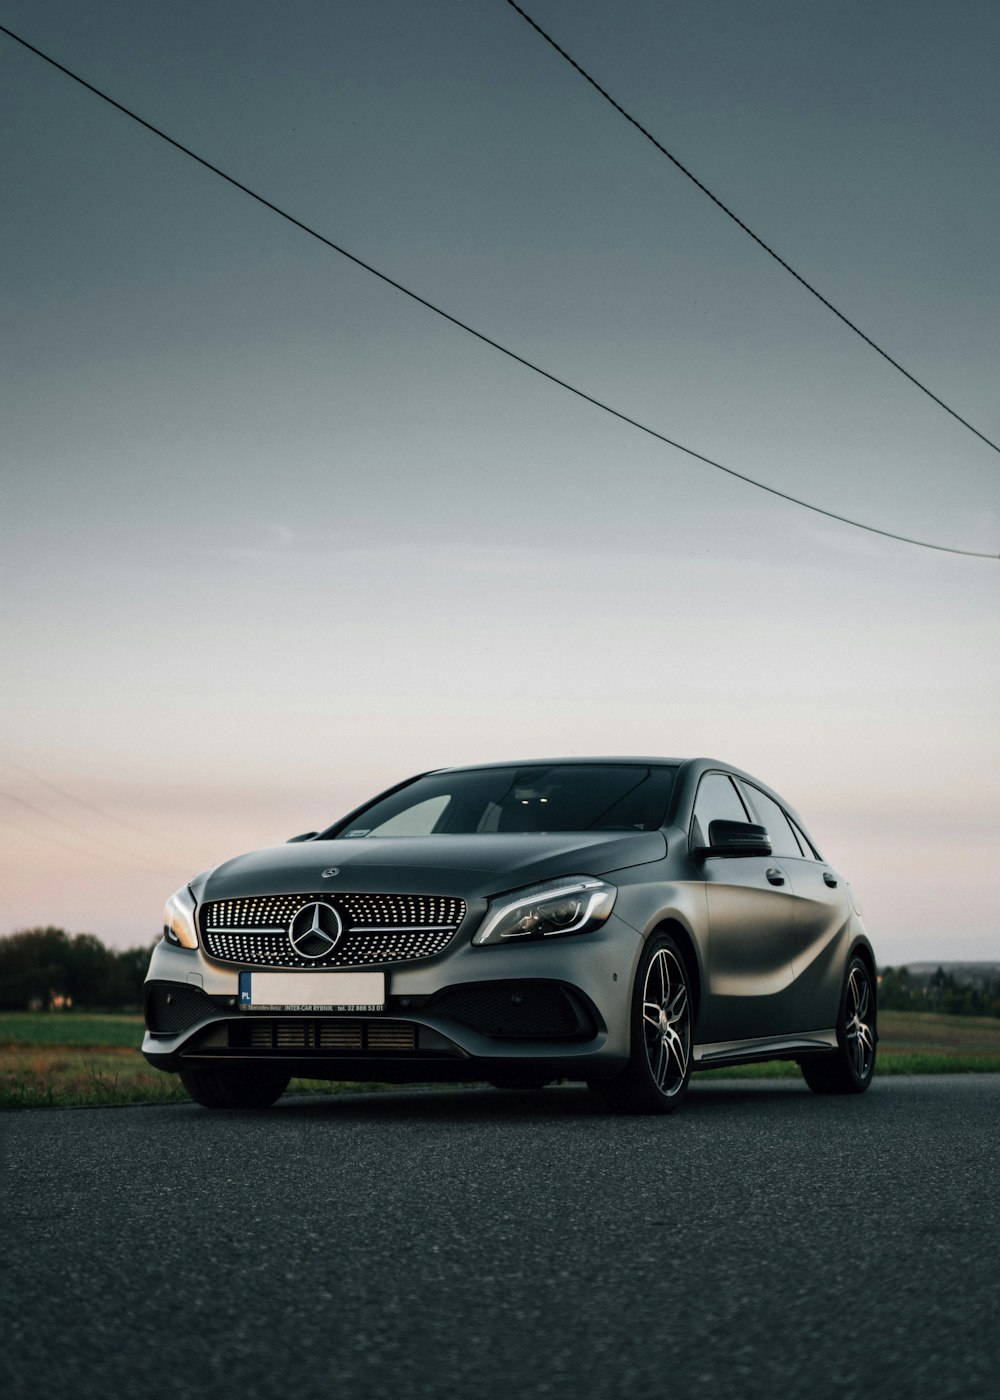 silver mercedes benz coupe on green grass field during daytime